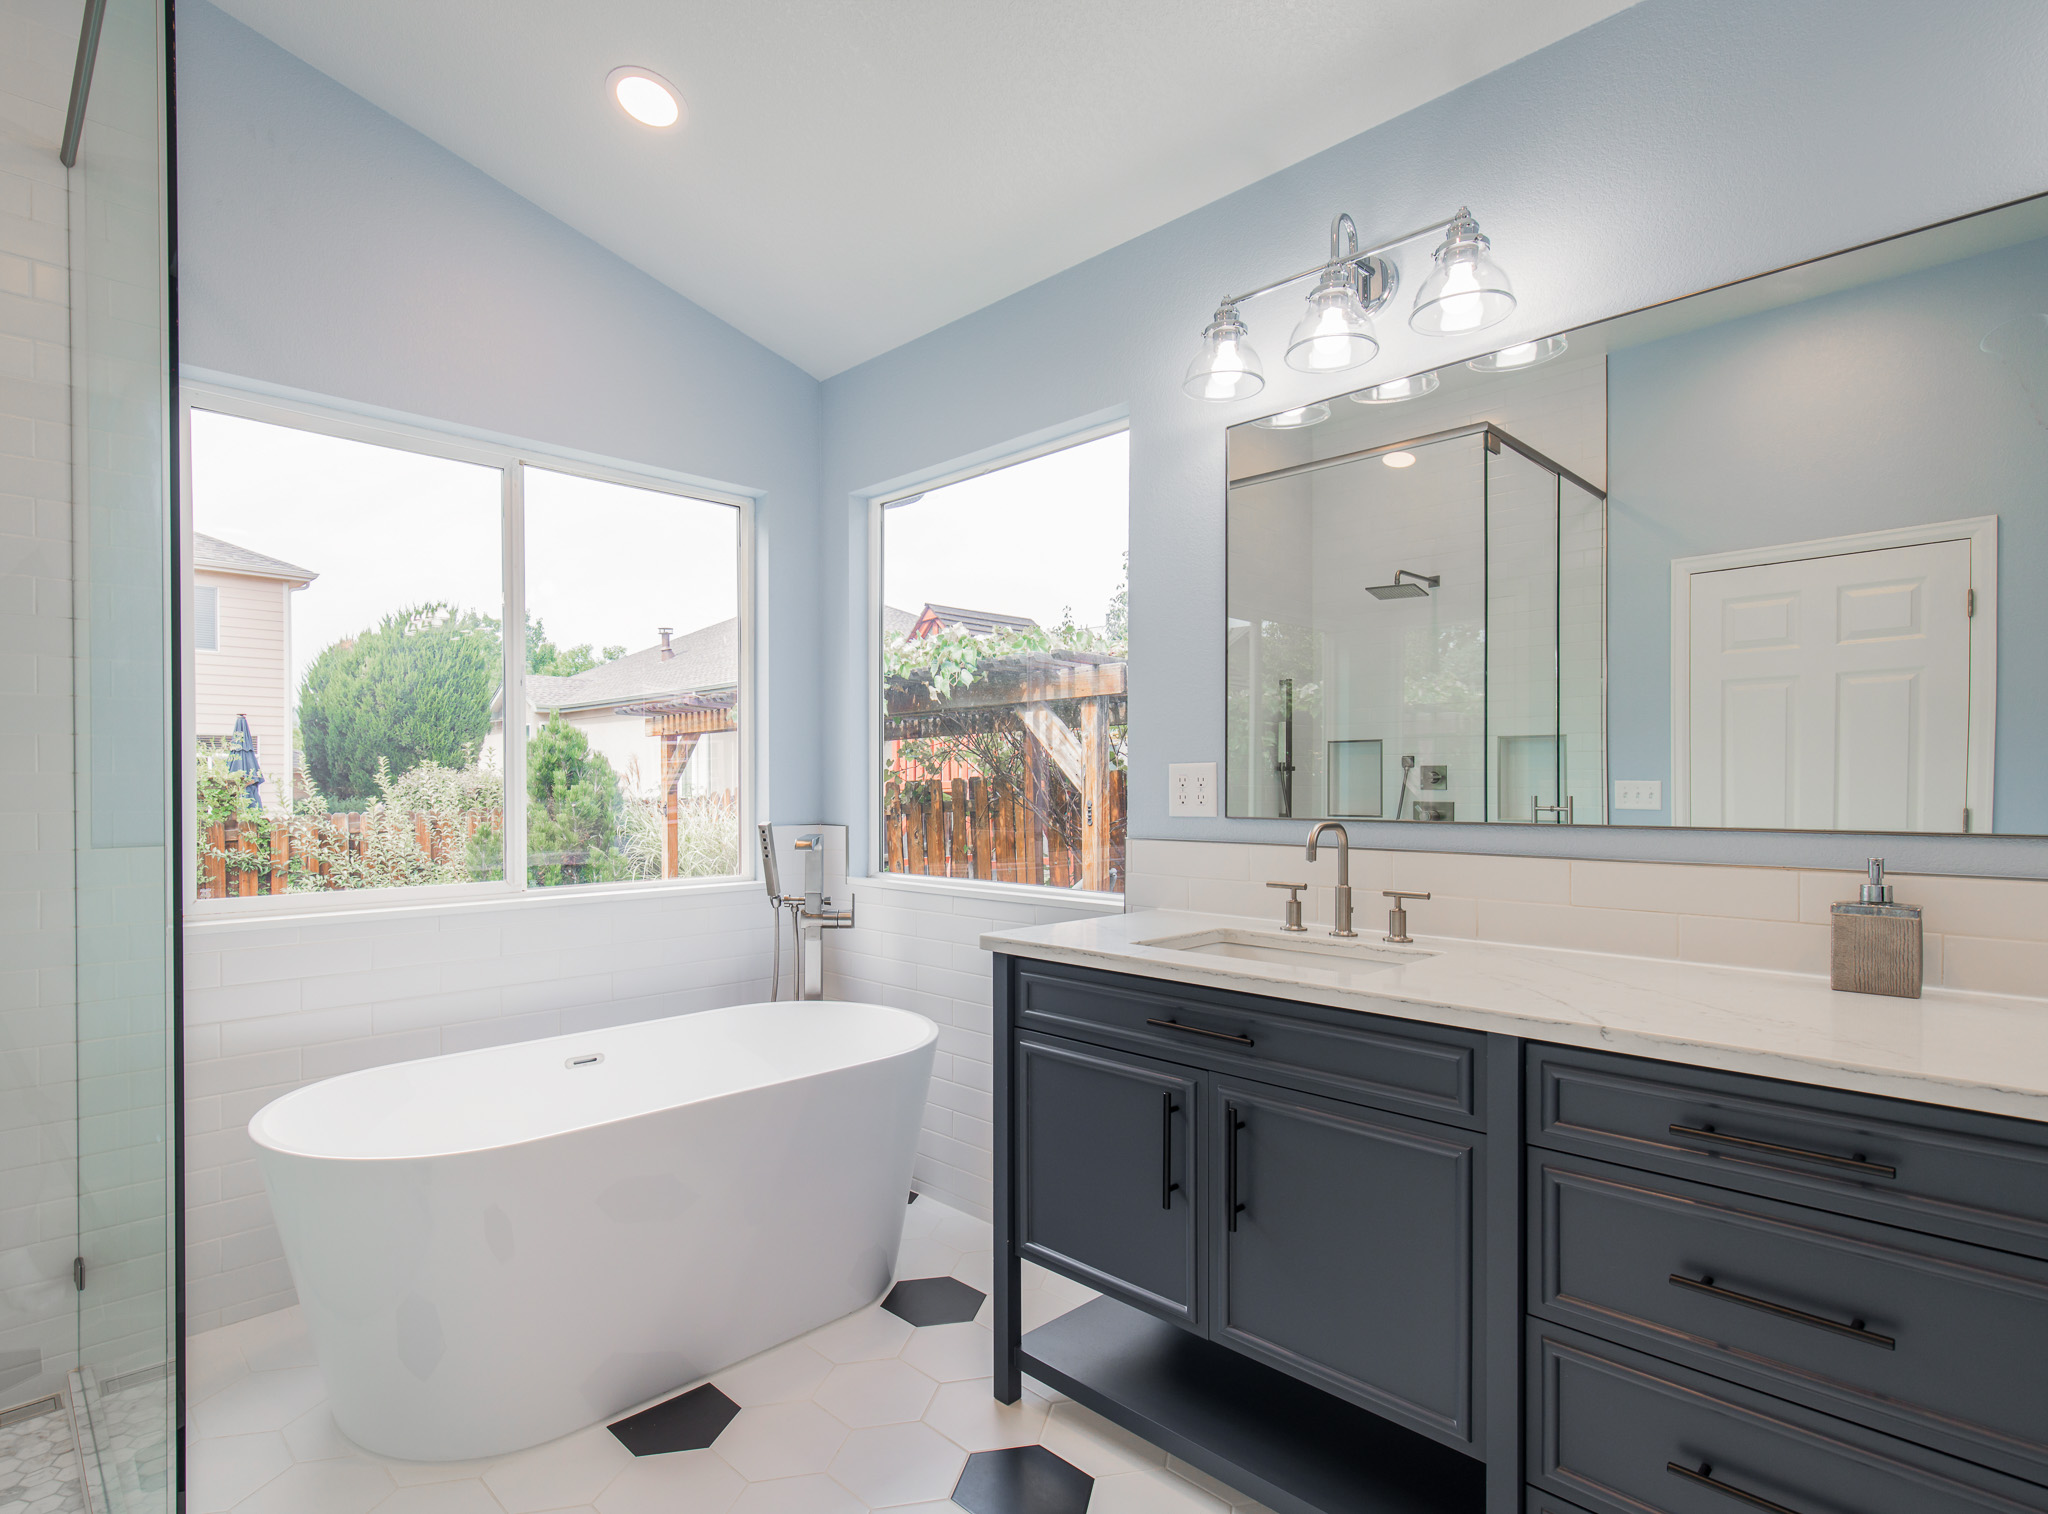 In the corner of a newly remodeled bathroom stands a white bathtub beneath a set of two windows.